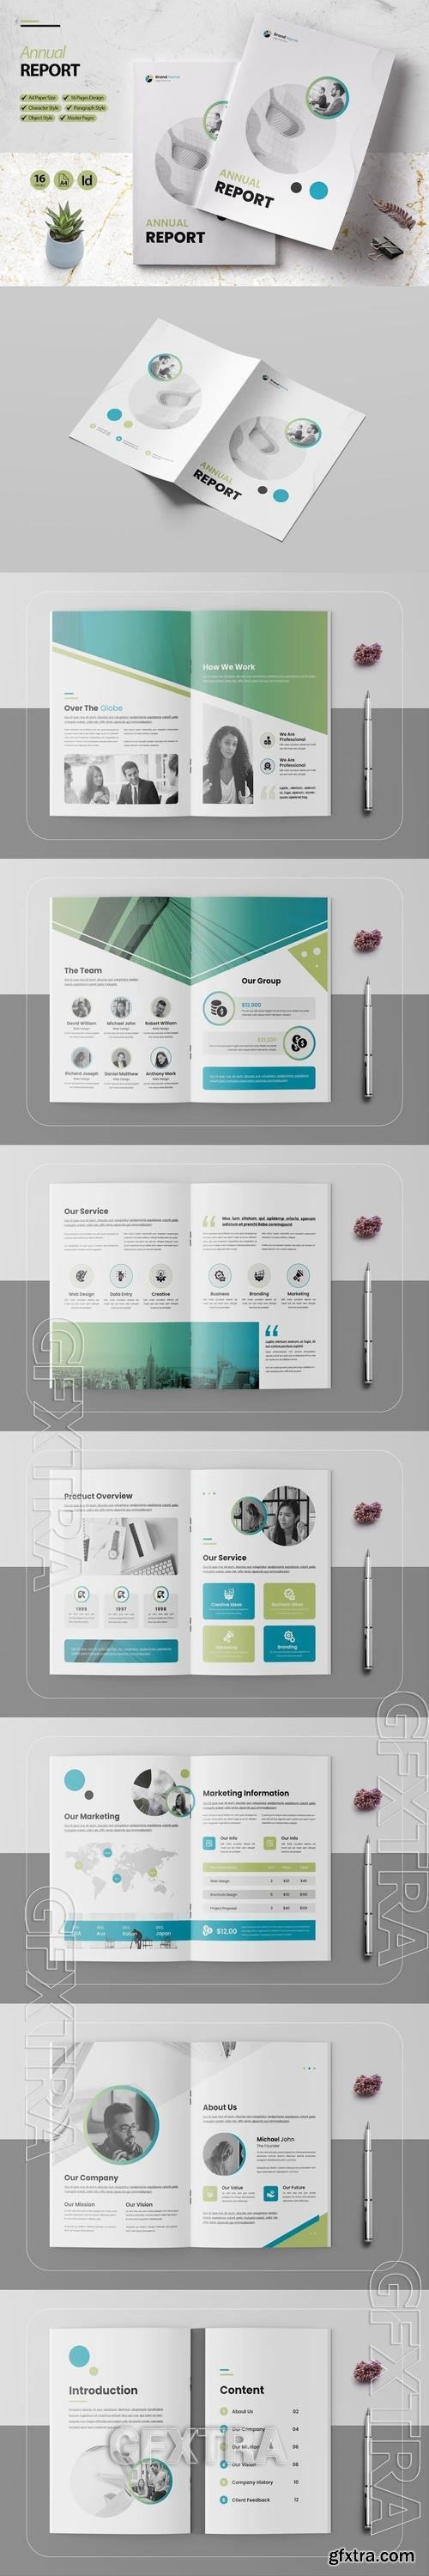 Annual Report Template XVVY7N3